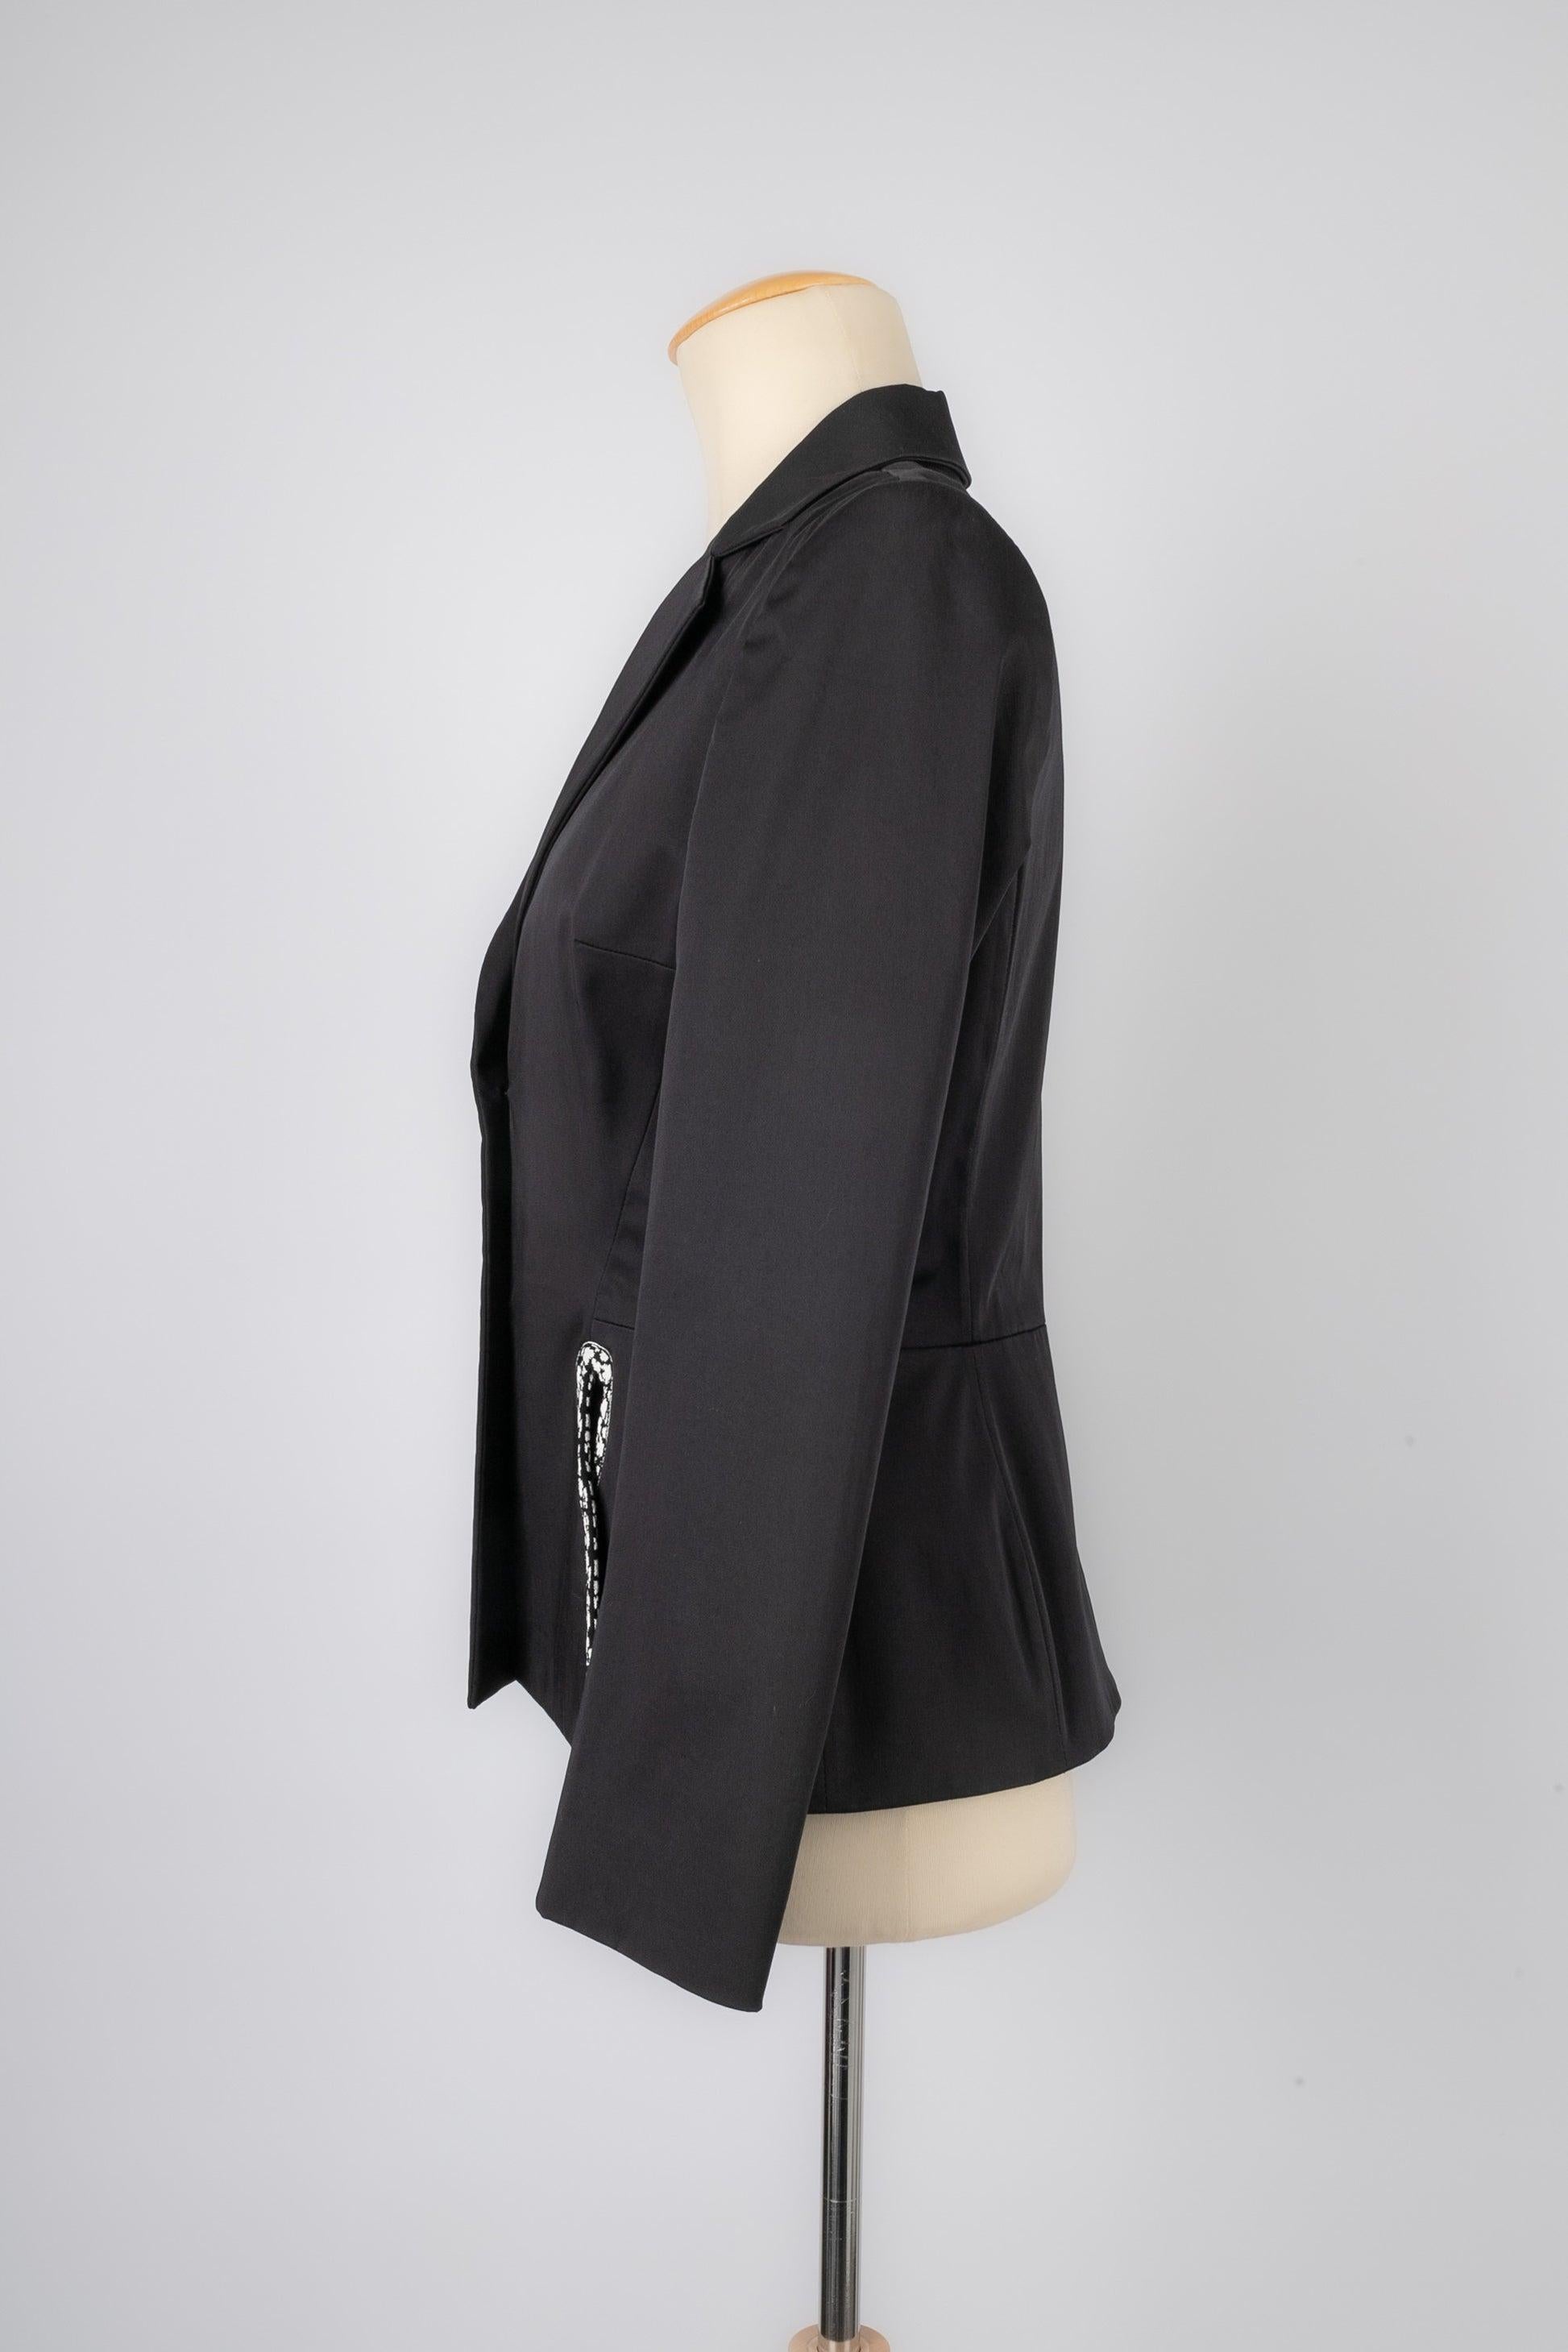 Dior - (Made in France) Black blended cotton jacket. 36 FR size indicated. 2005 circa Collection.

Additional information:
Condition: Very good condition
Dimensions: Shoulder width: 37 cm - Chest: 46 cm - Waist: 36 cm - Sleeve length: 55 cm -